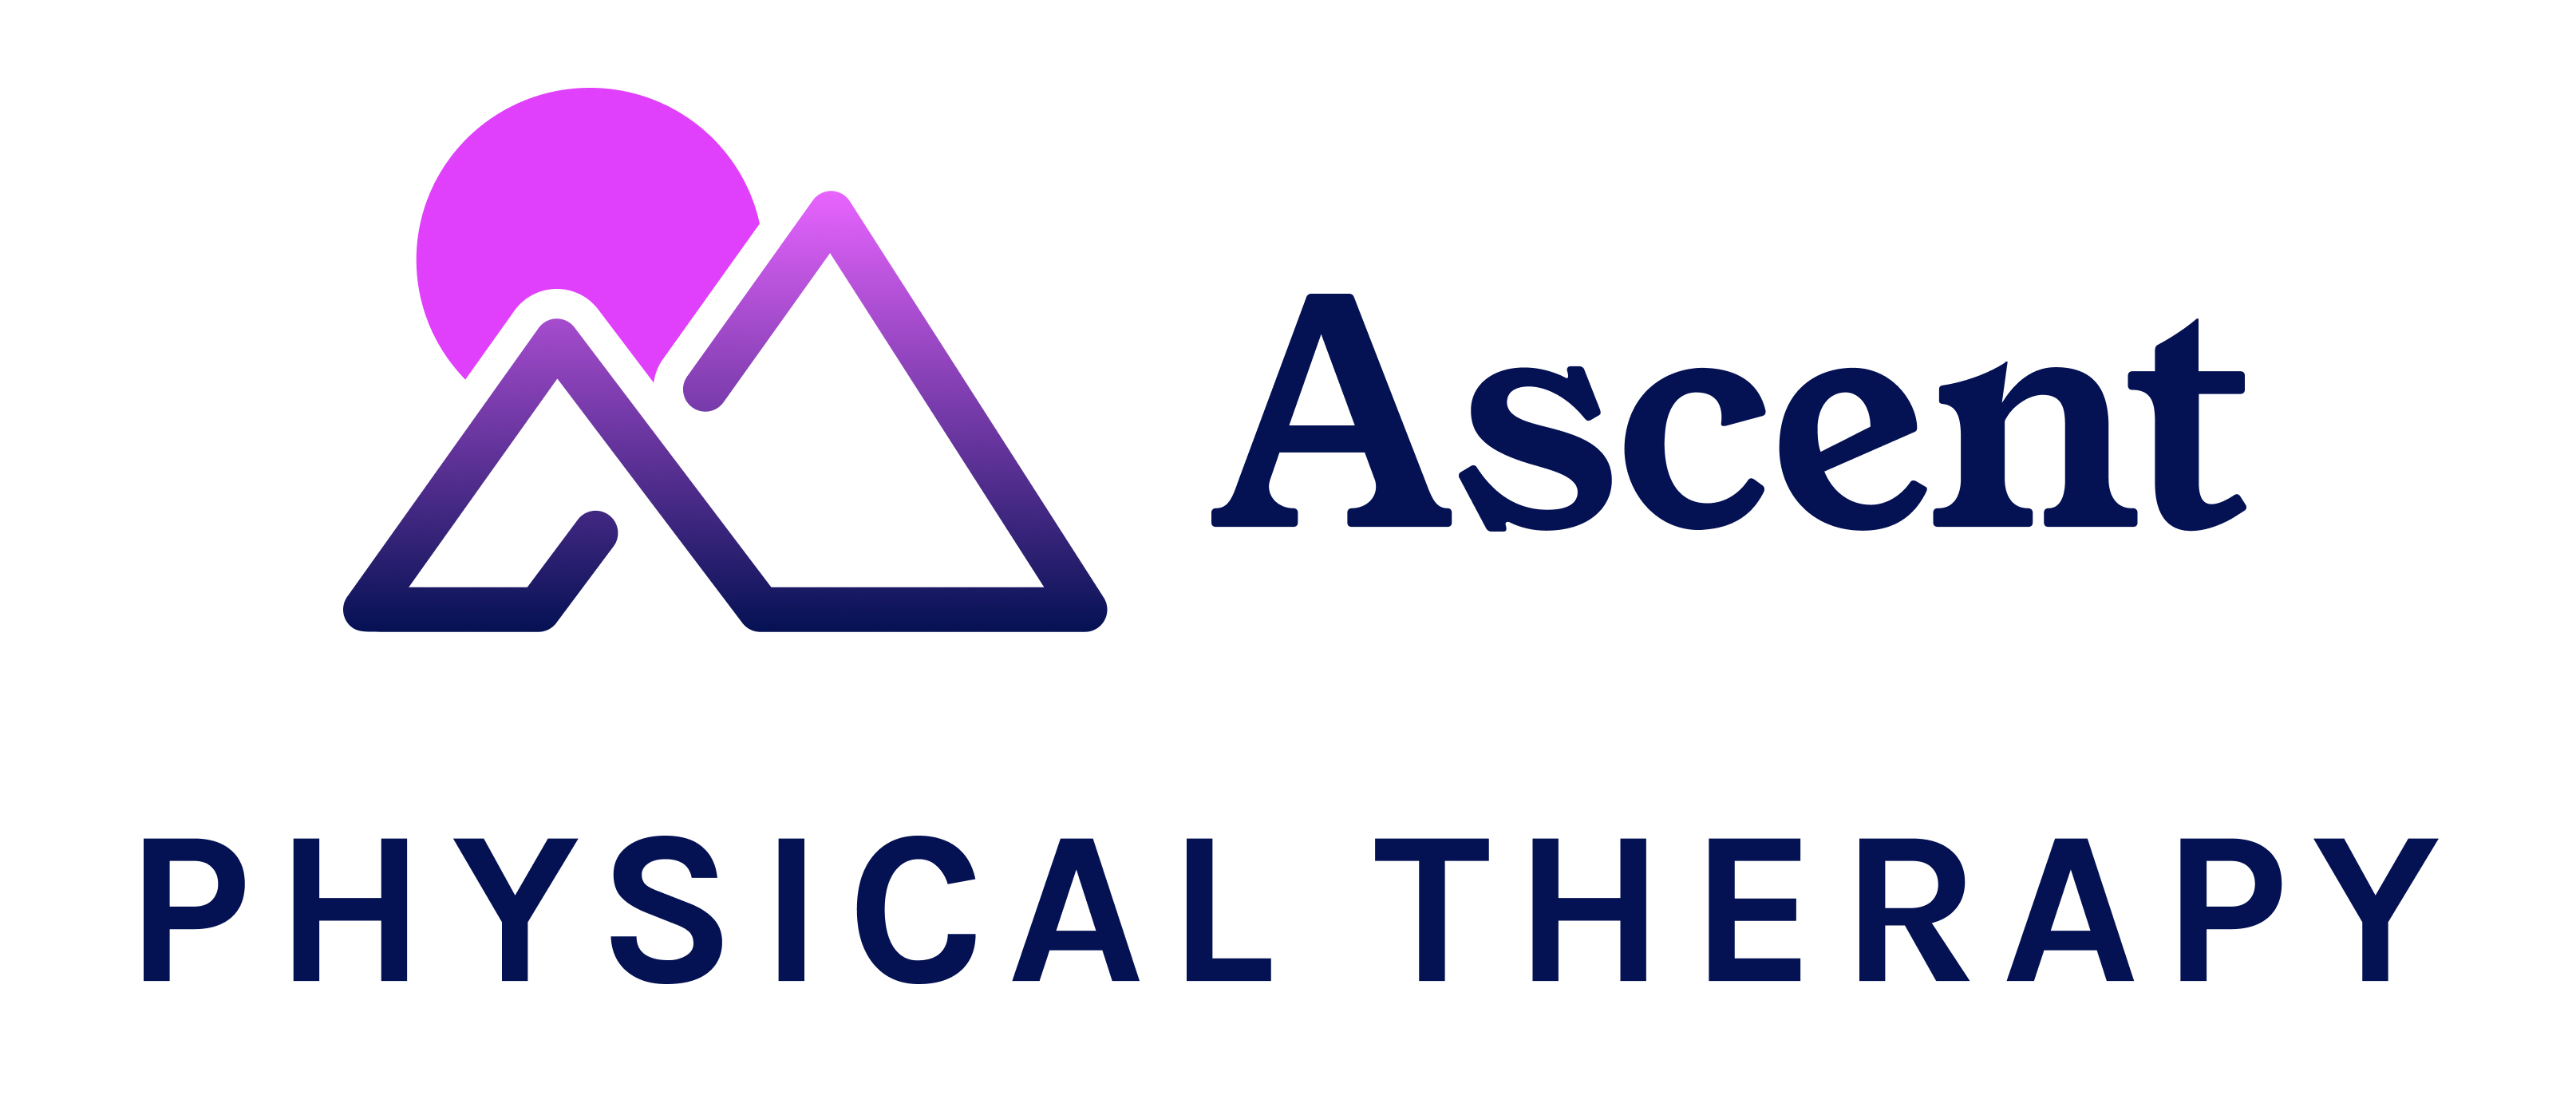 Ascent Physical Therapy NYC